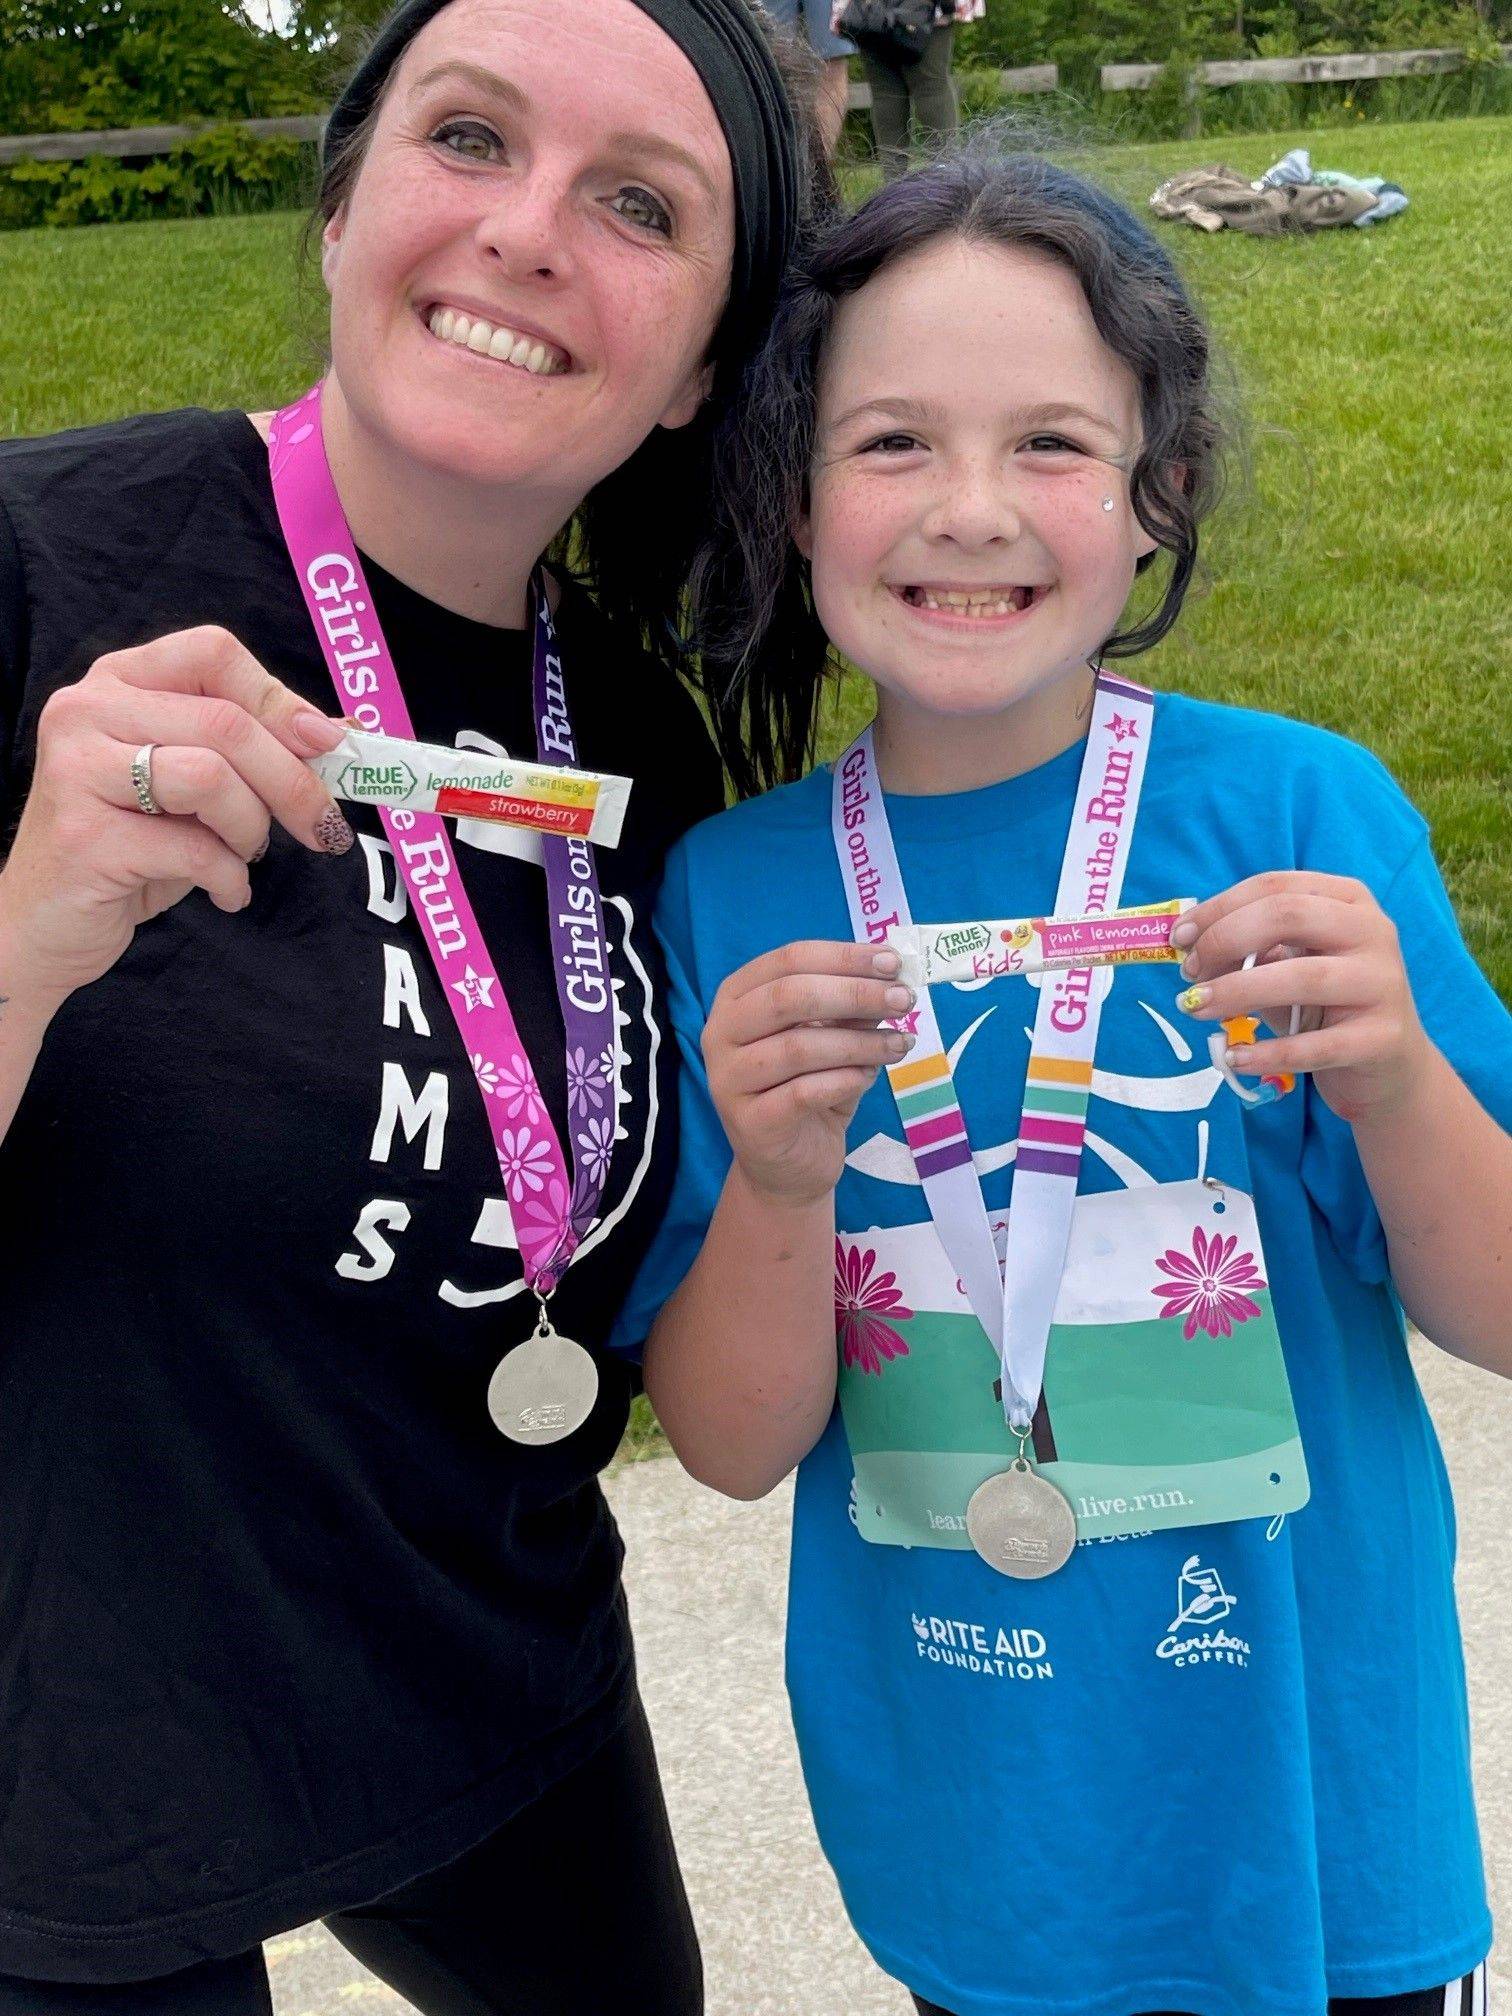 Mother and daughter with medals and packets of True Lemon after running the race